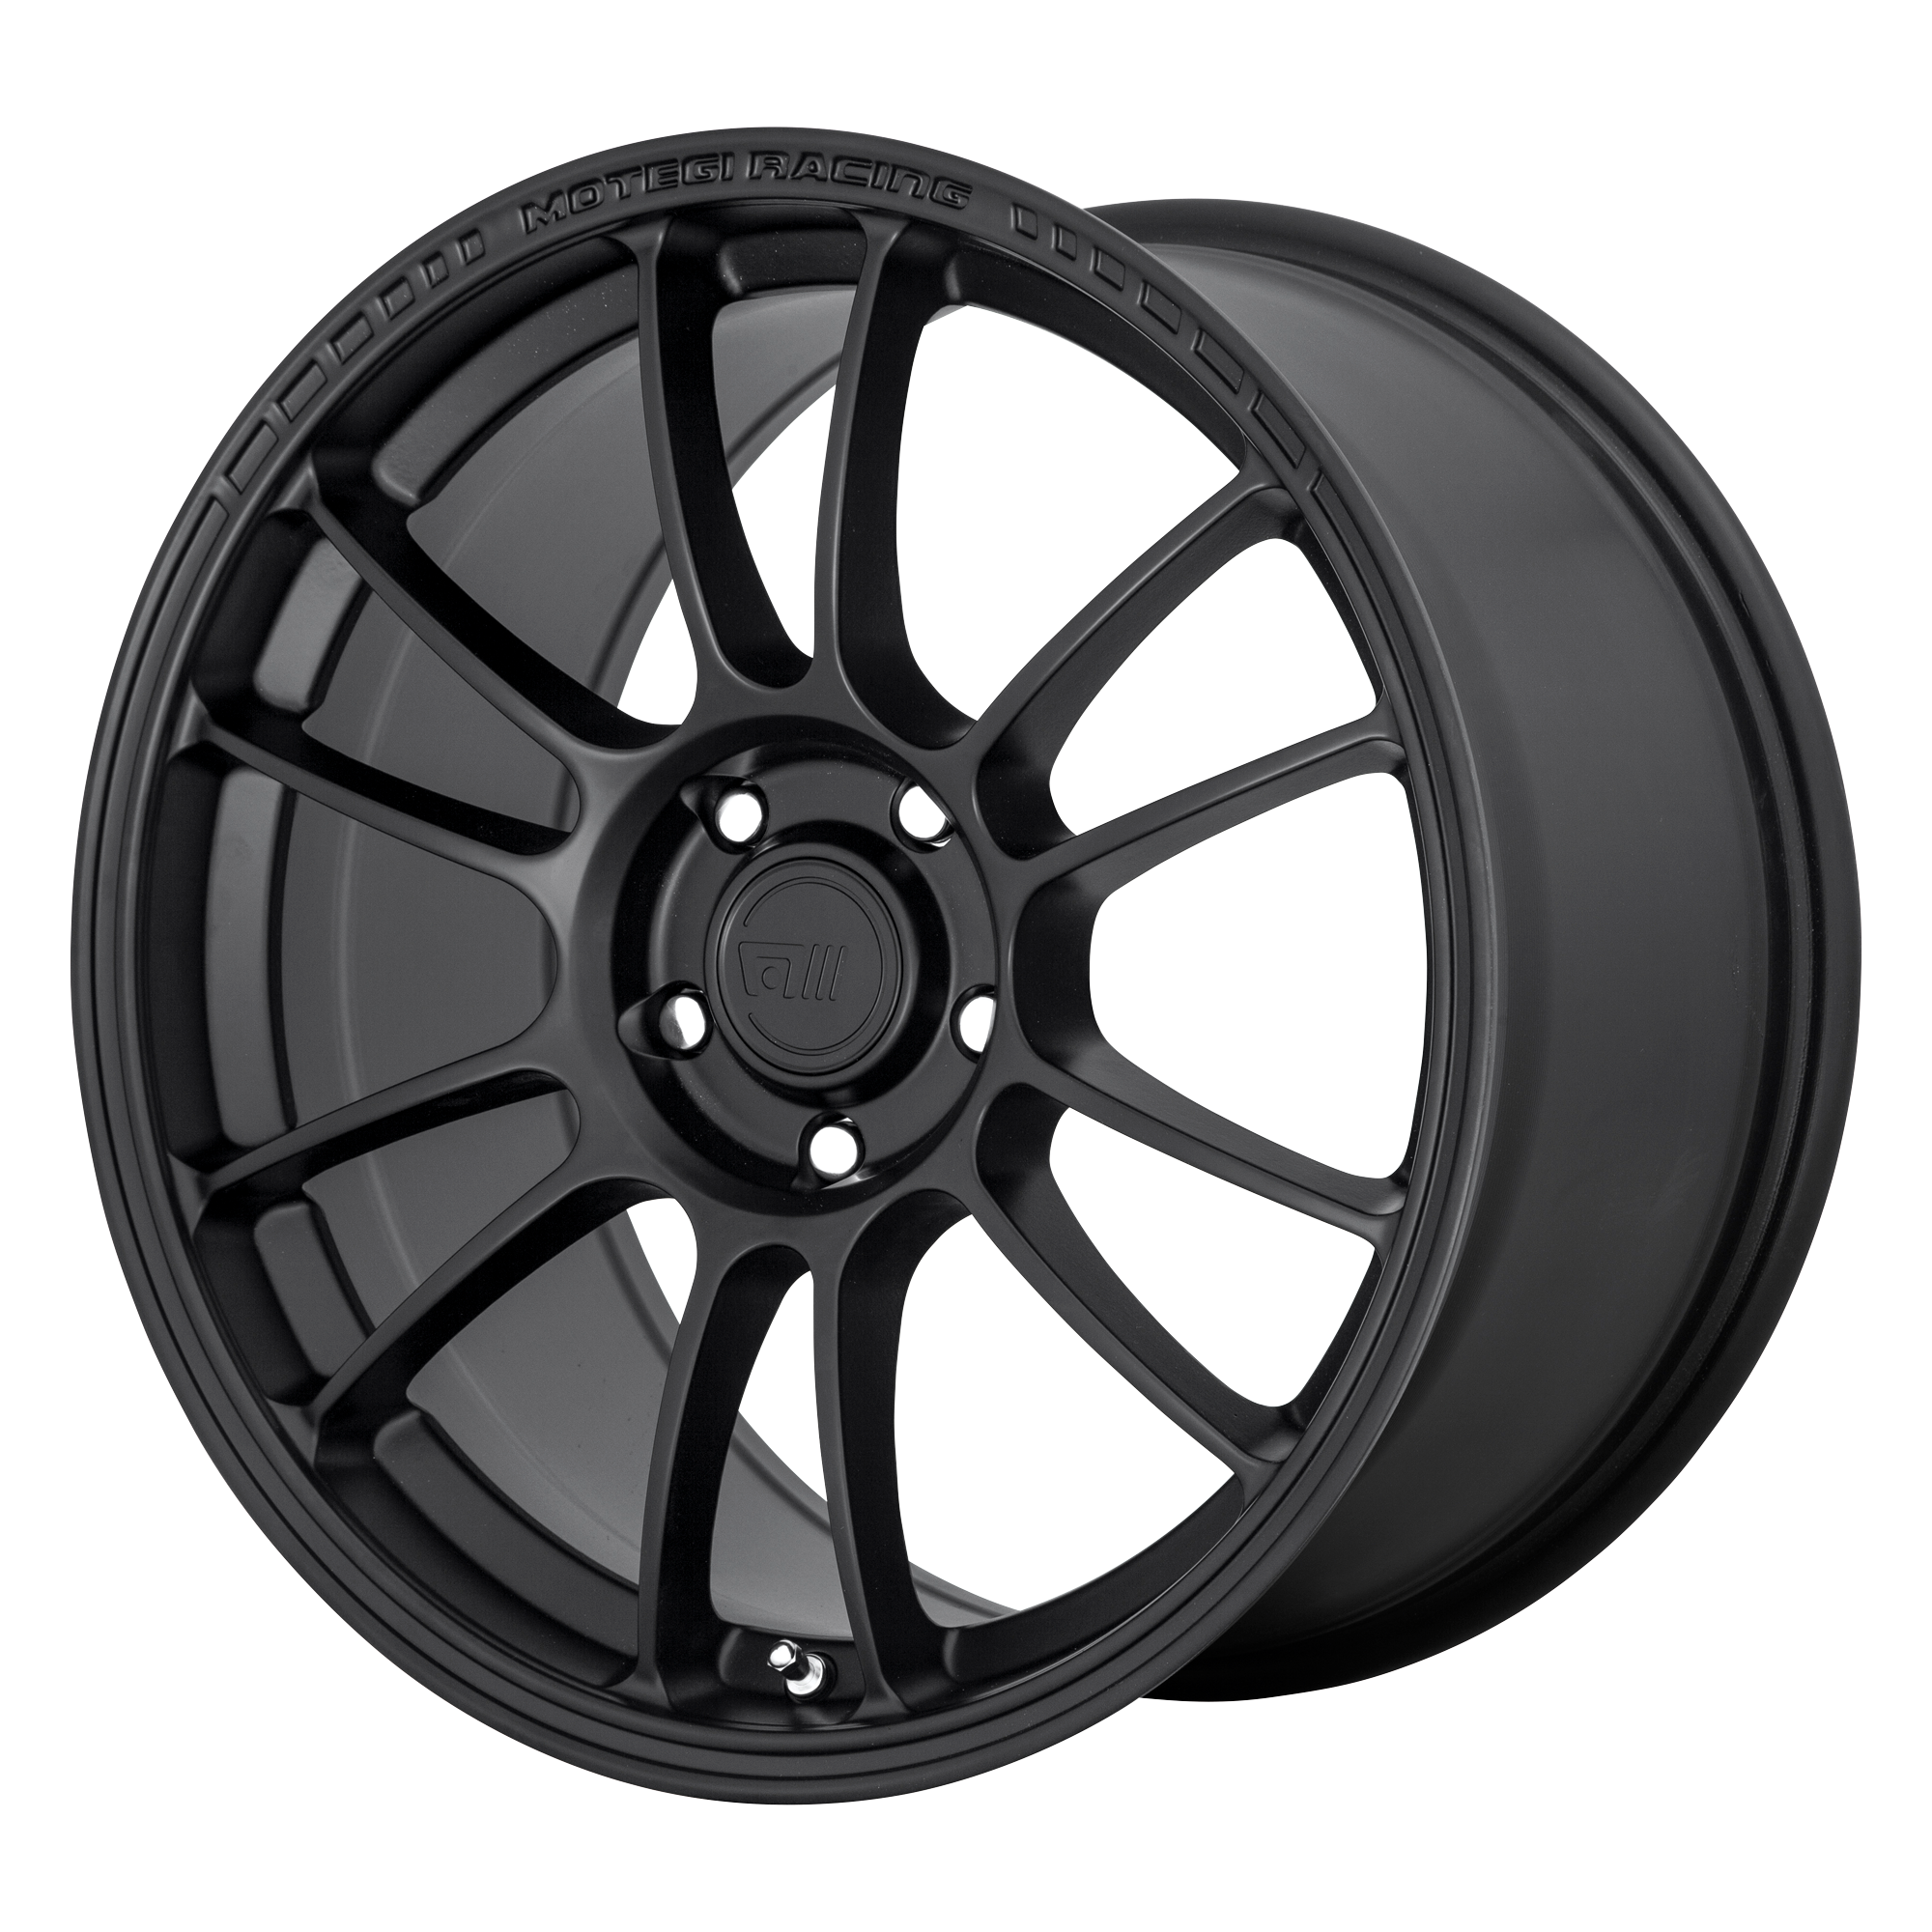 SS6 18x9.5 5x120.00 SATIN BLACK (45 mm) - Tires and Engine Performance